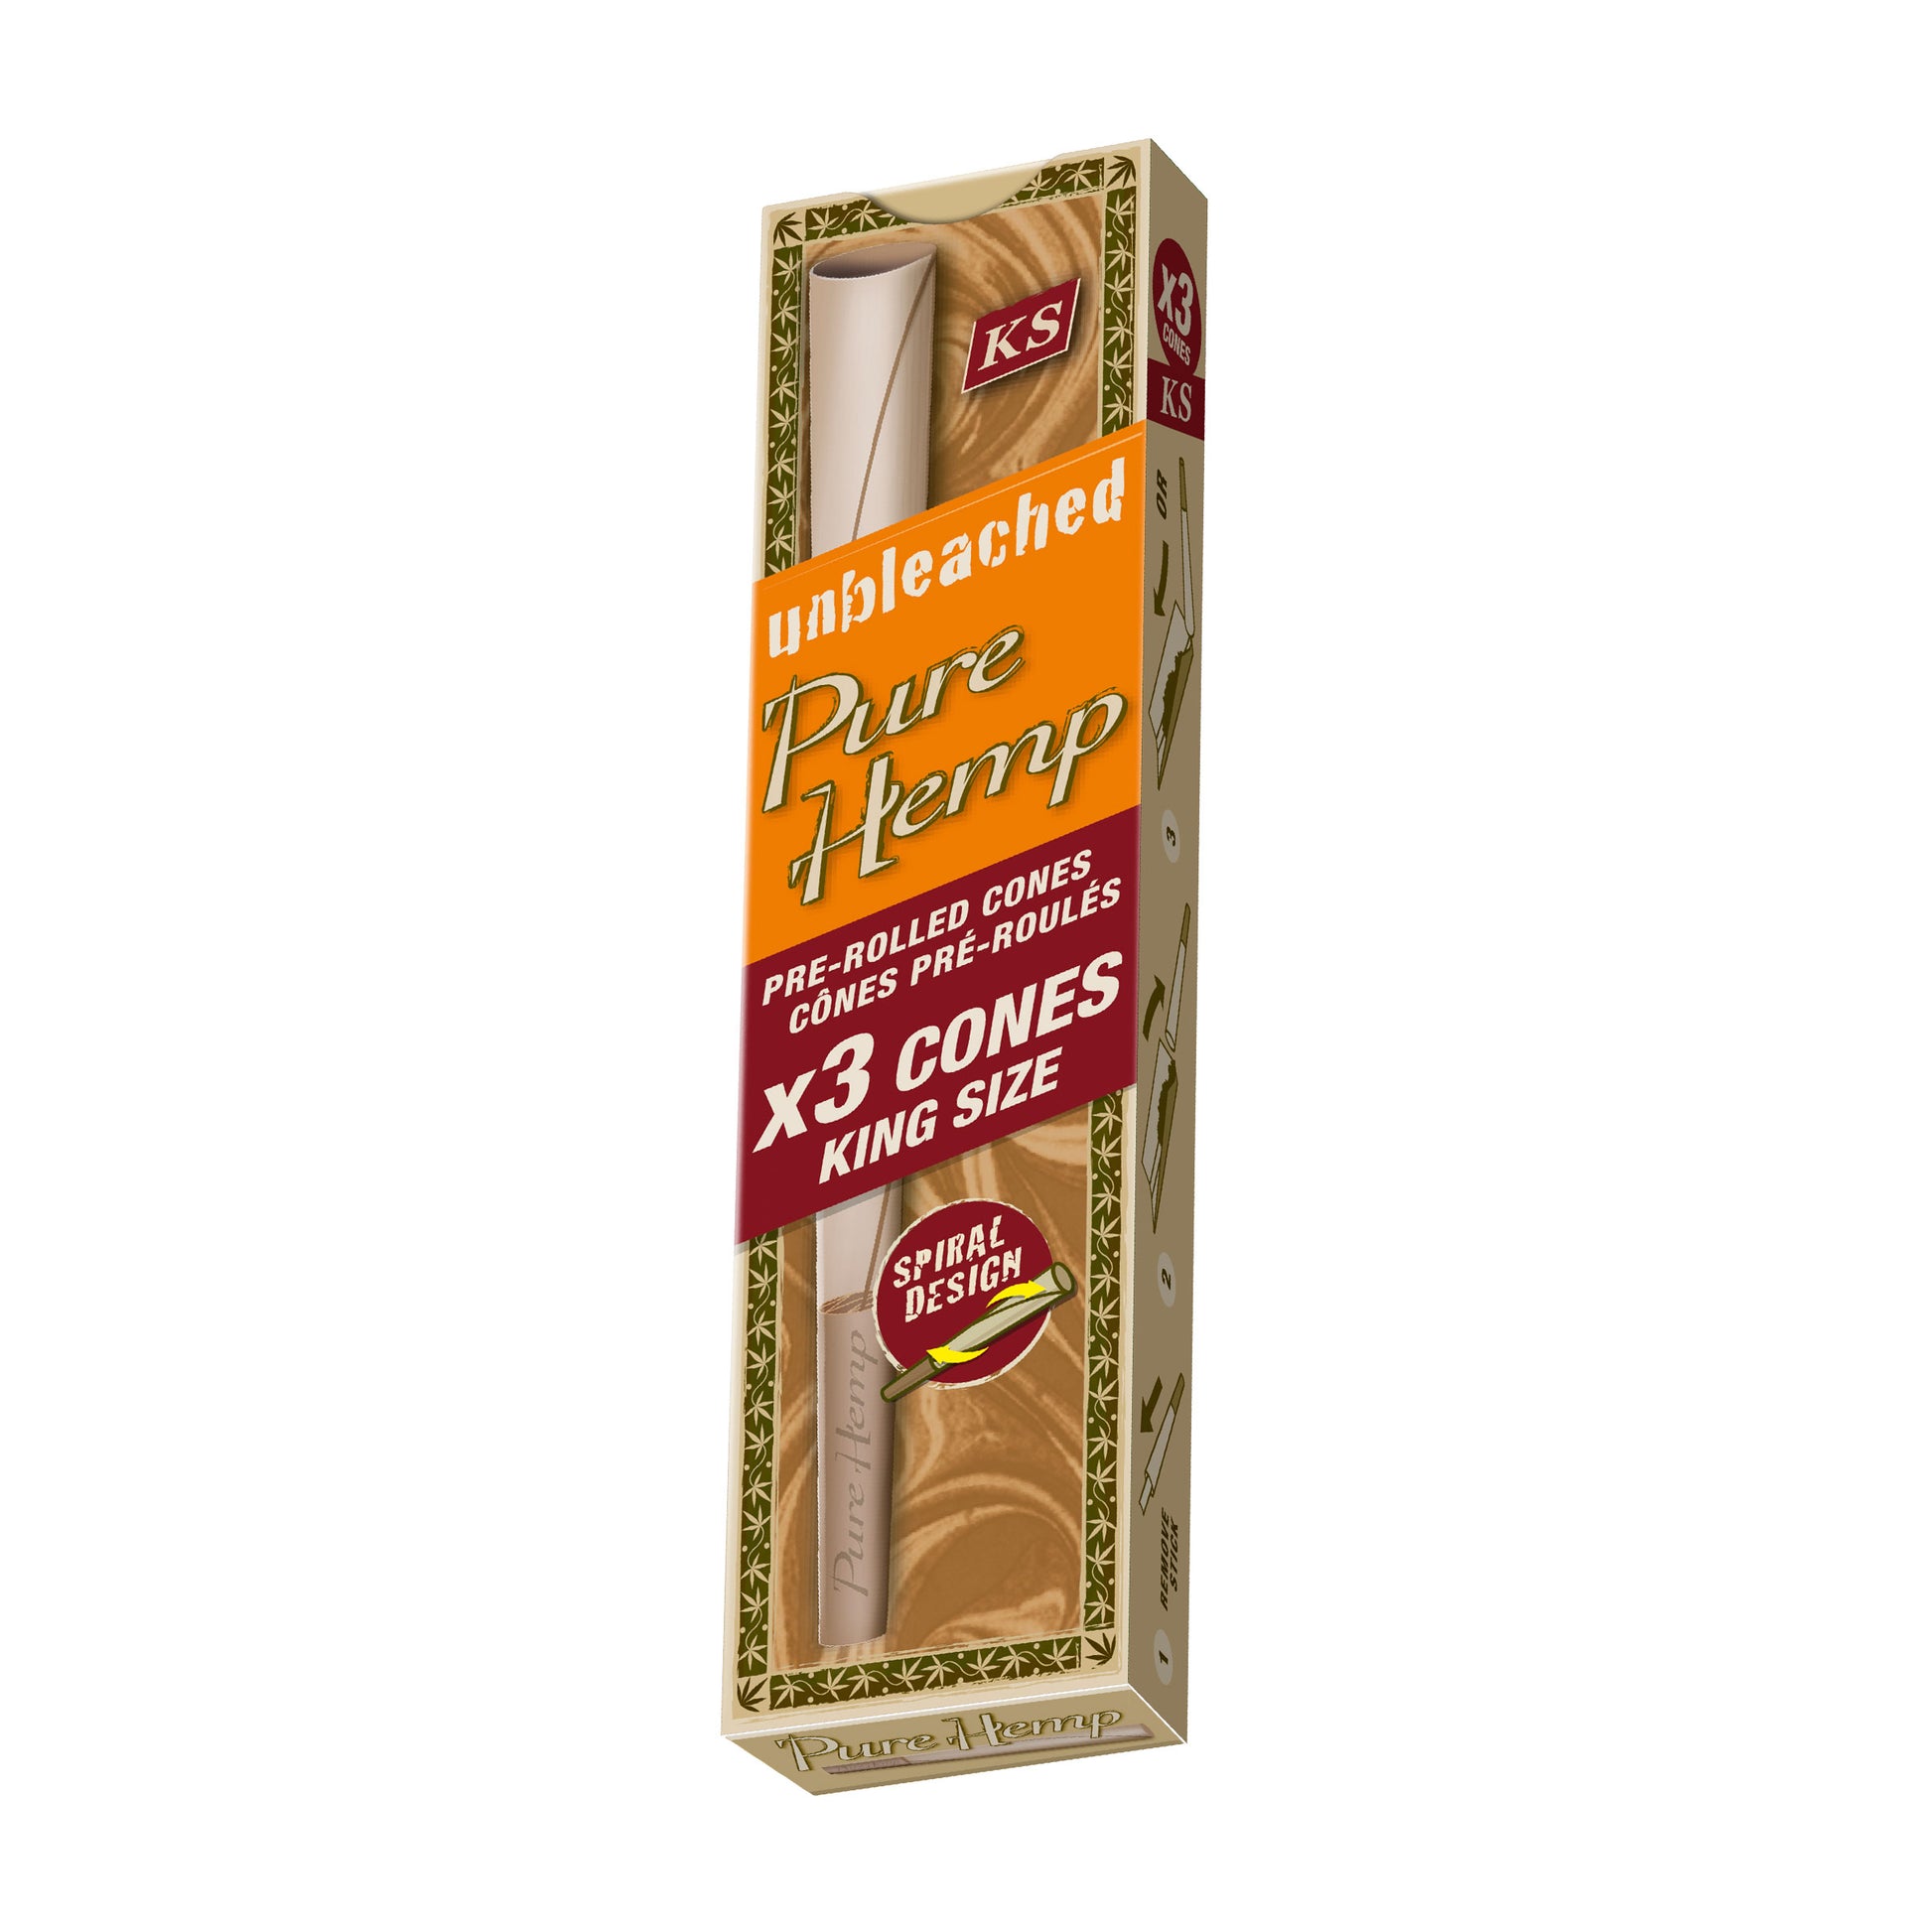 PURE HEMP Unbleached King Size Cones Consumer 3 Packs